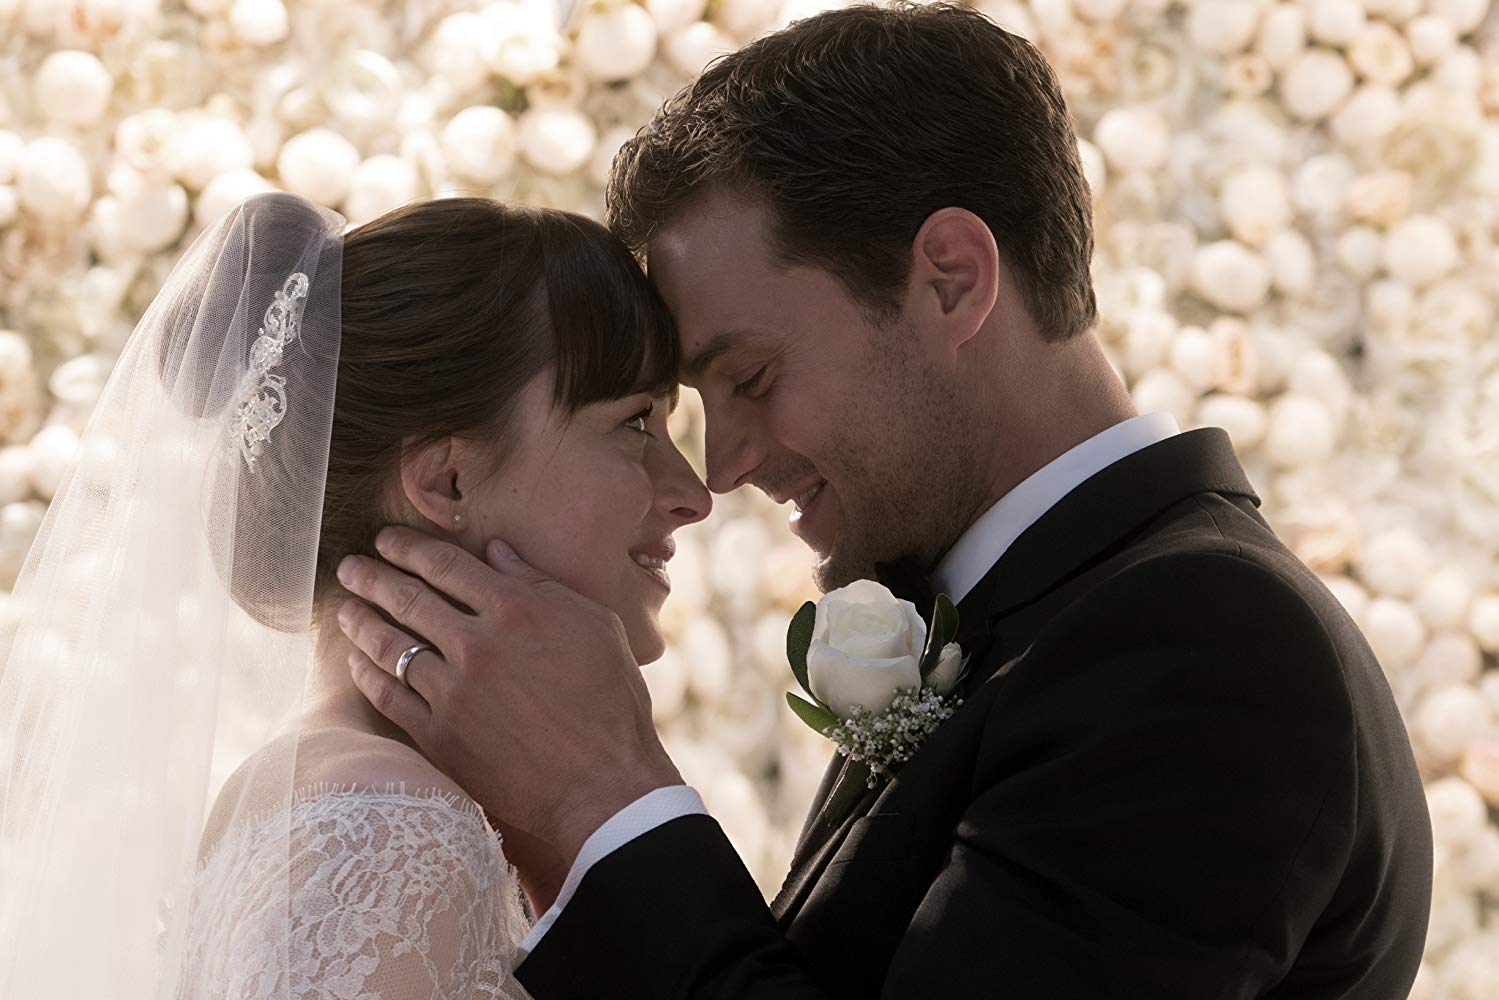 PHOTO: A scene from "Fifty Shades Freed."